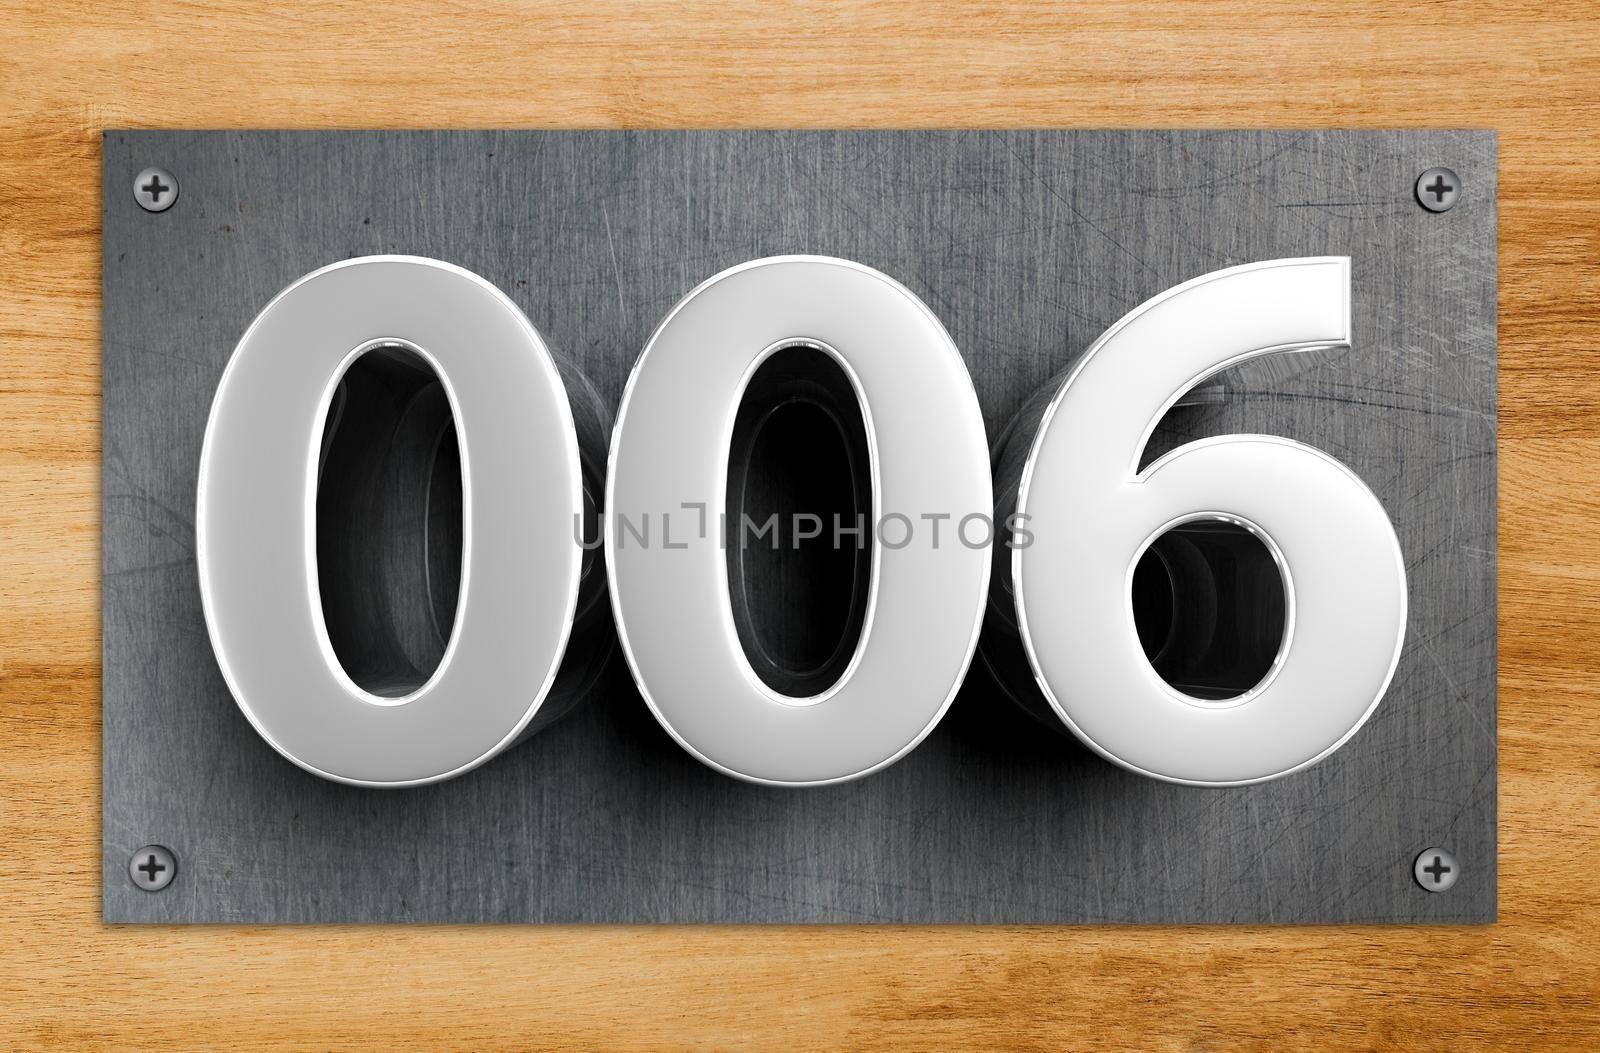 Rendering 3D illustration Stainless Steel Signs number 006 hanging against the room door.(With Clipping Path). by thitimontoyai